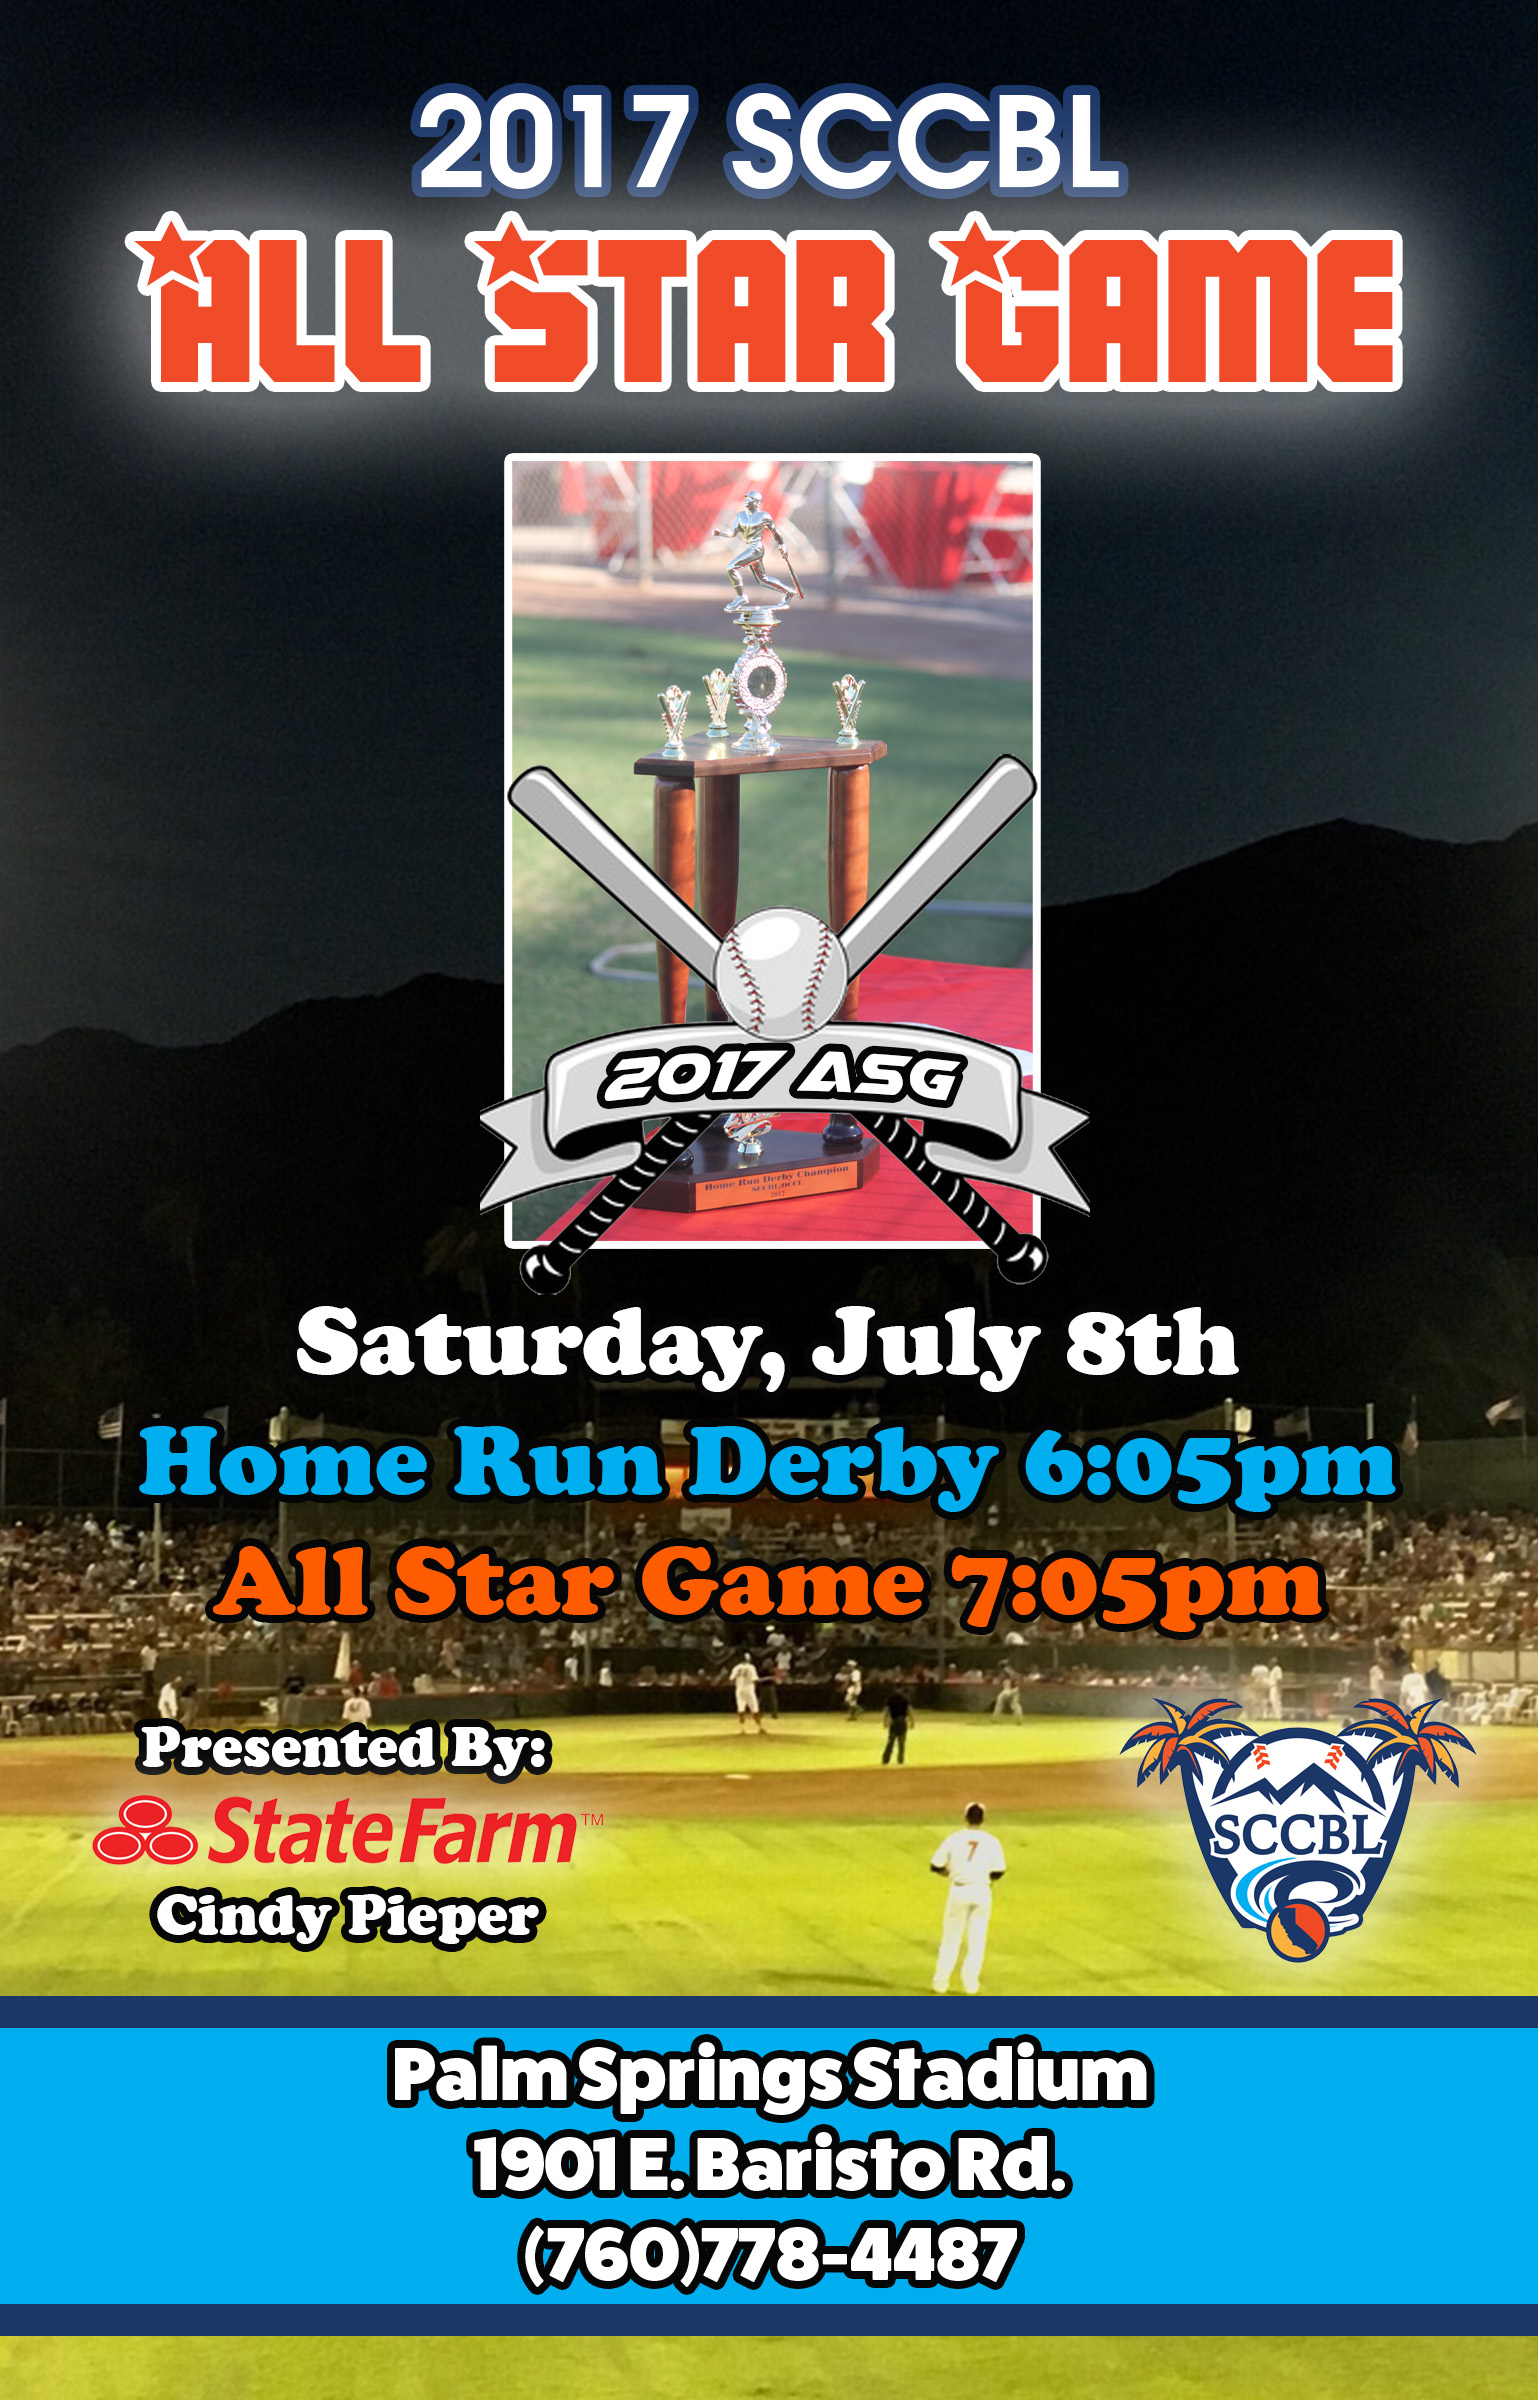 SCCBL All-Star Game and Home Run Derby Saturday, July 8